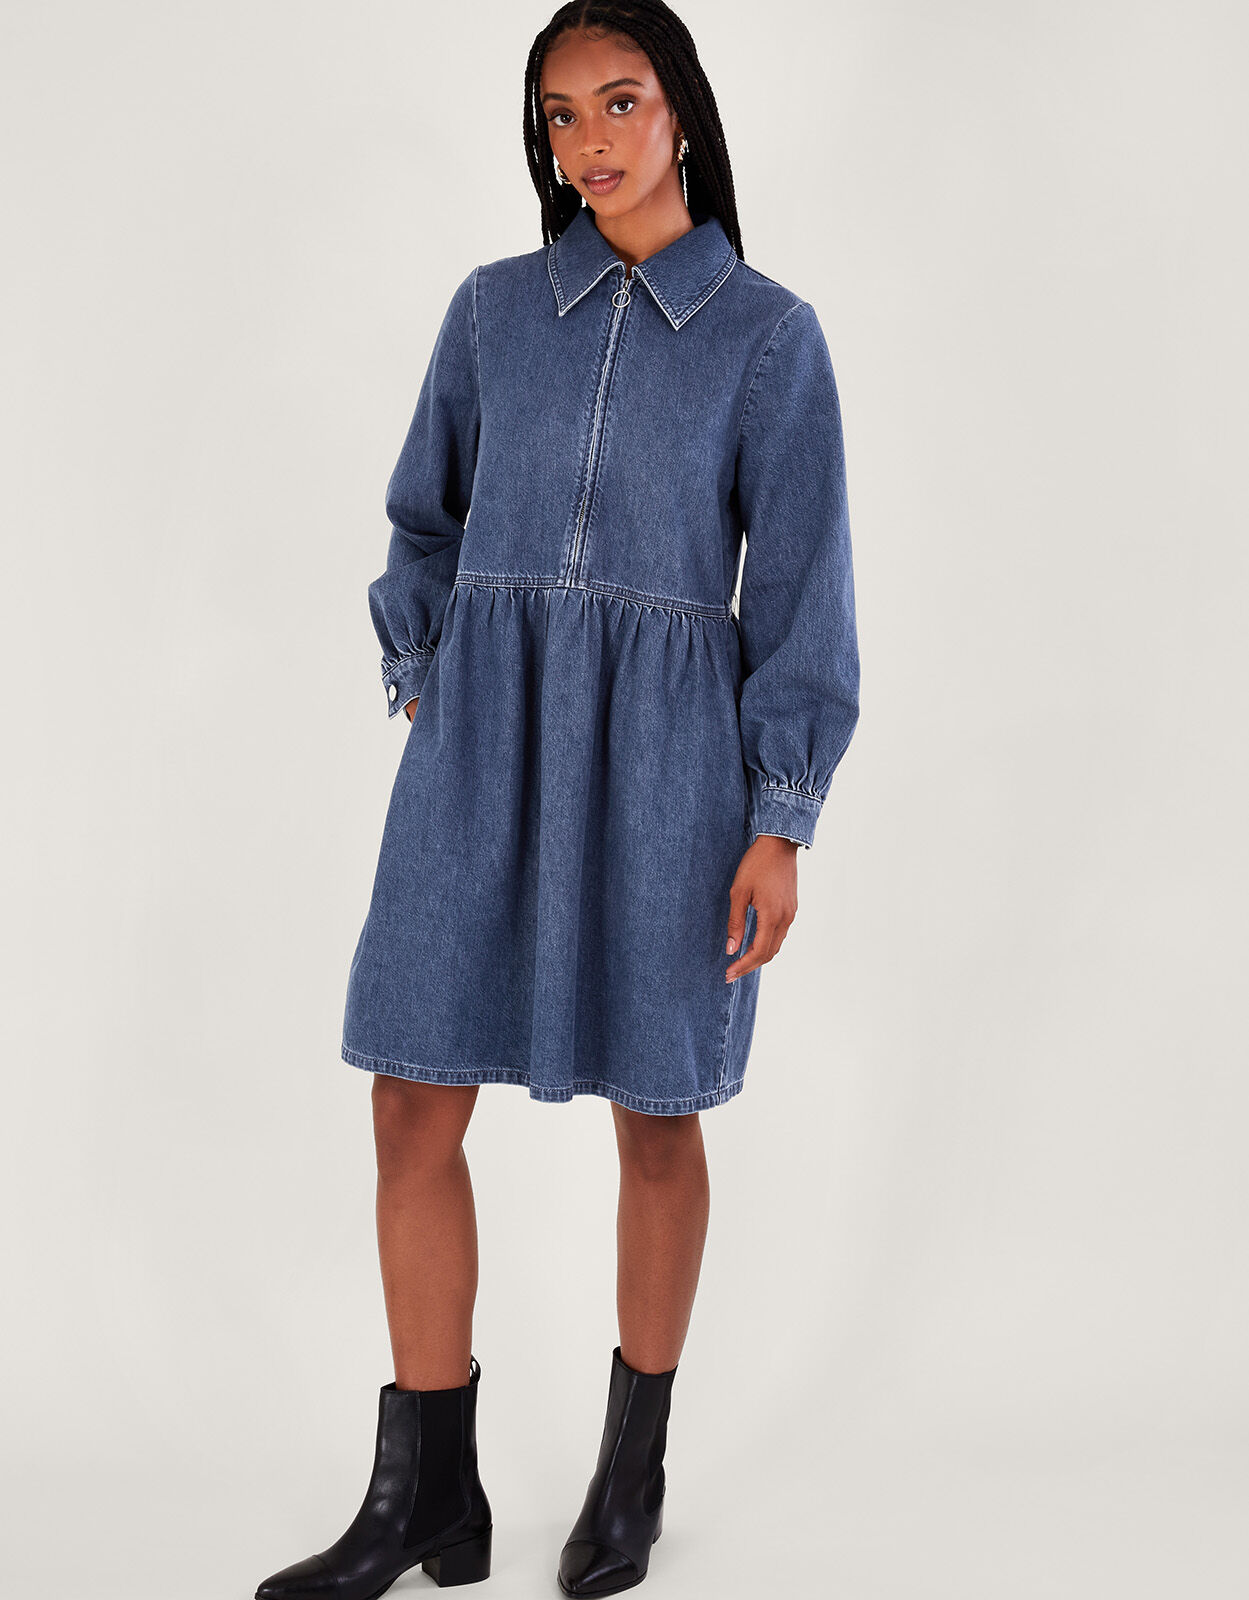 Discover more than 158 new denim dress best